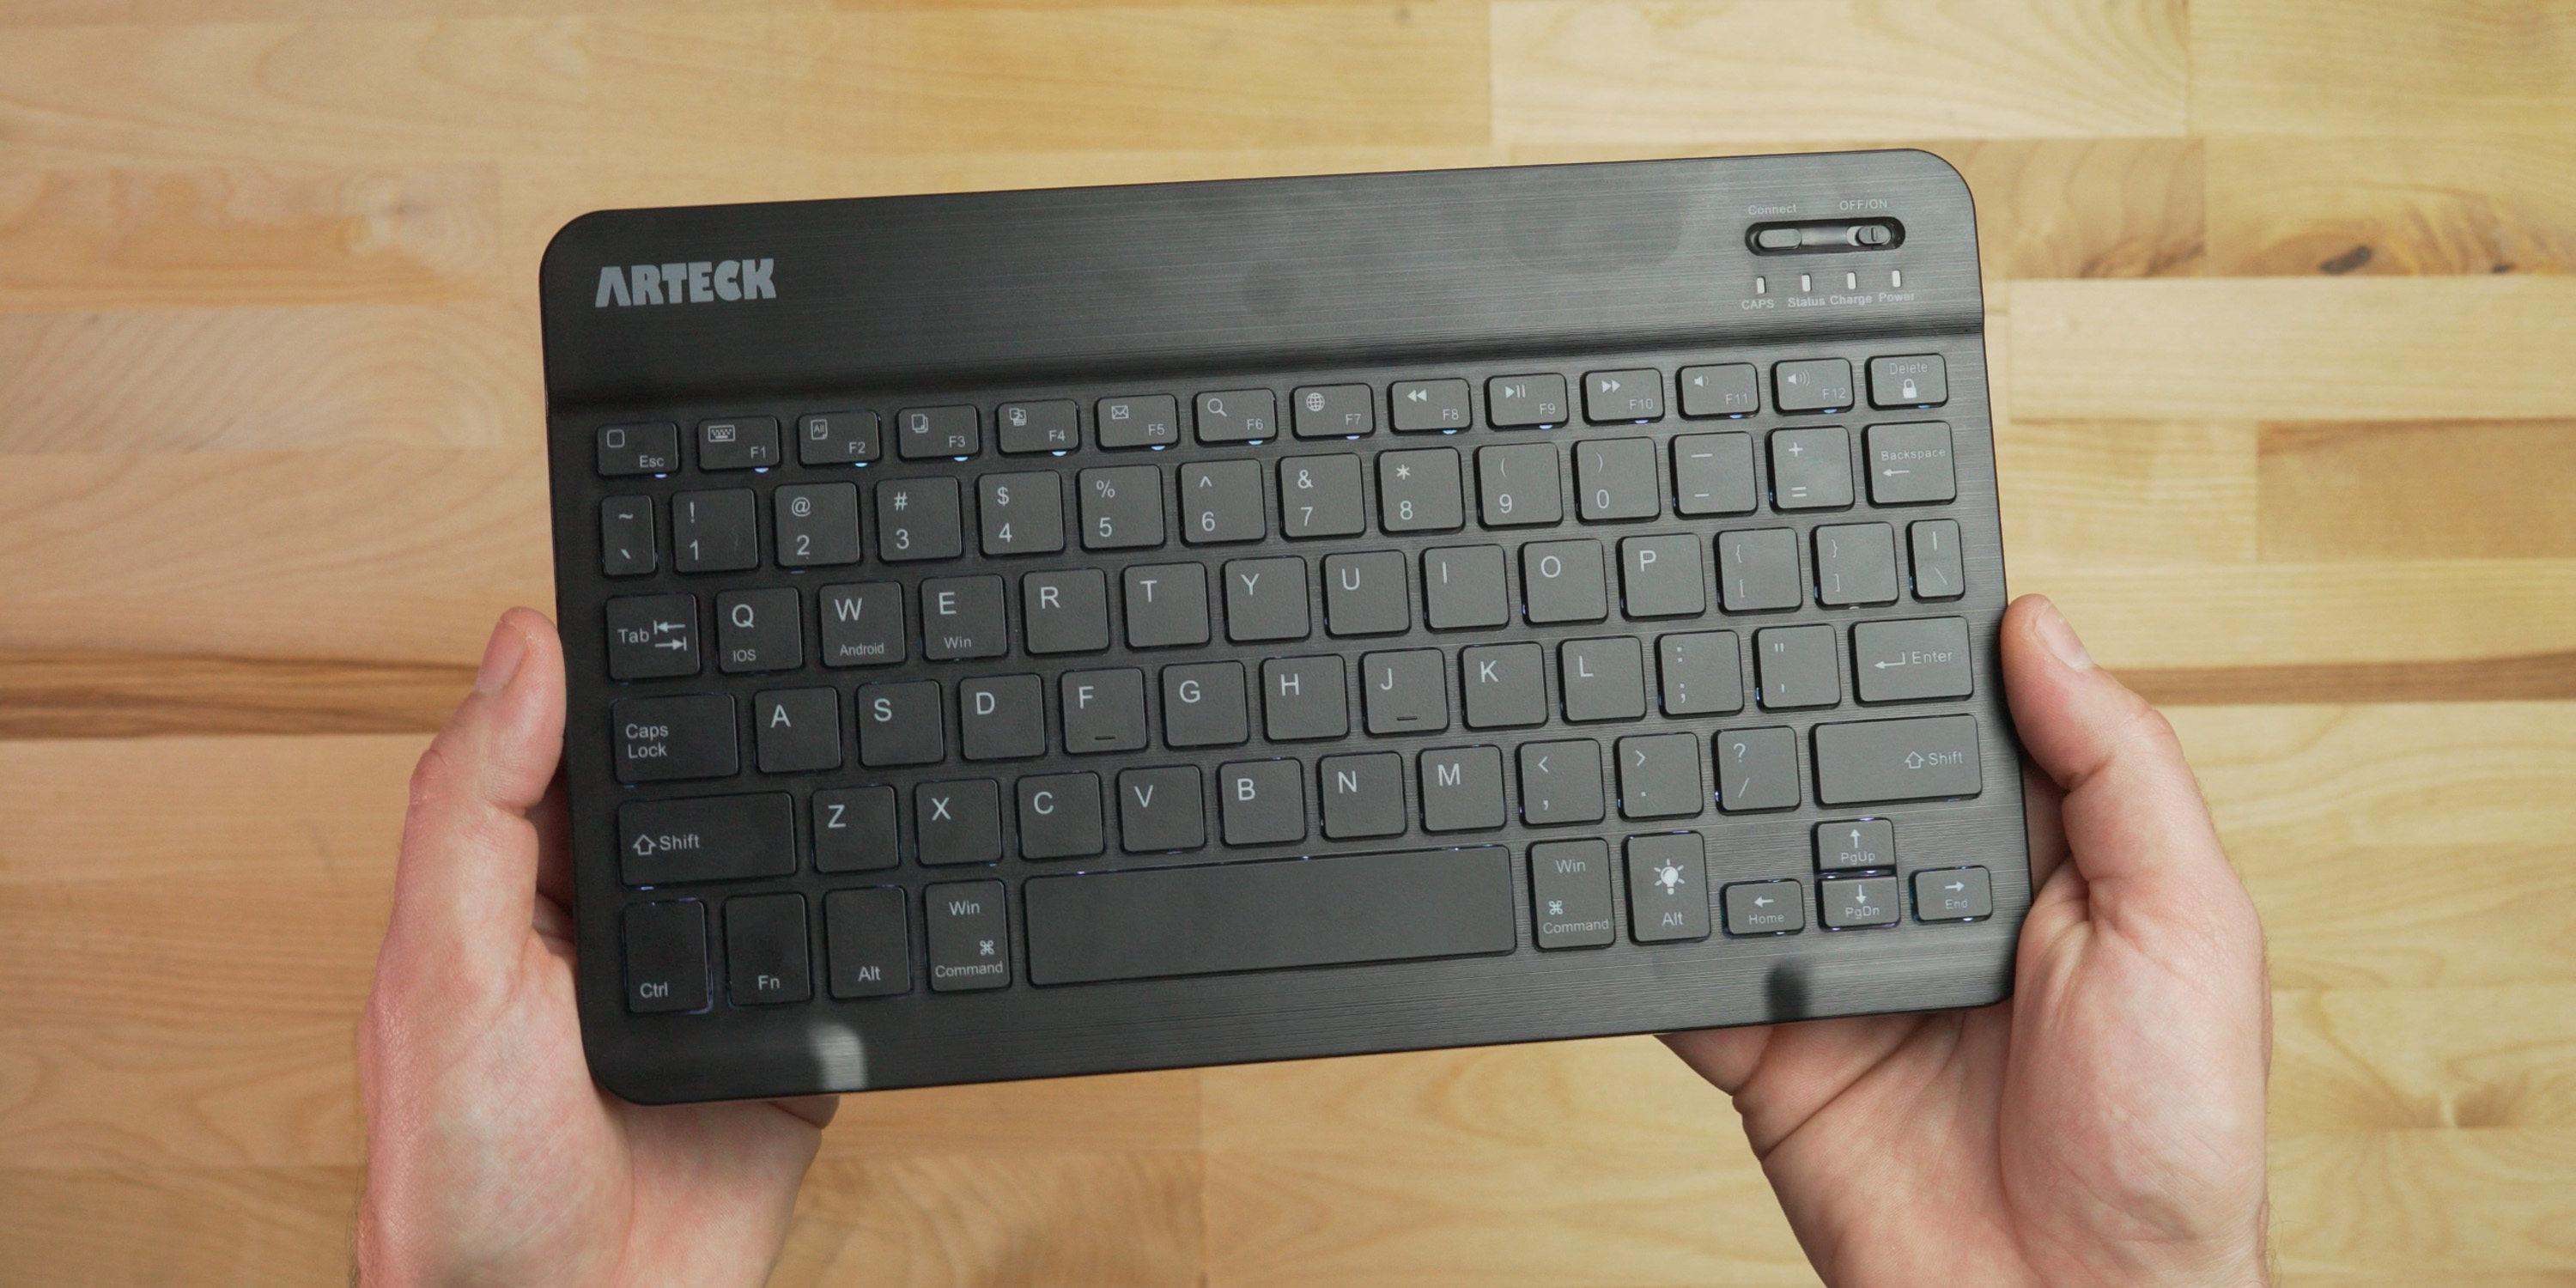 holding the Arteck Bluetooth Keyboard